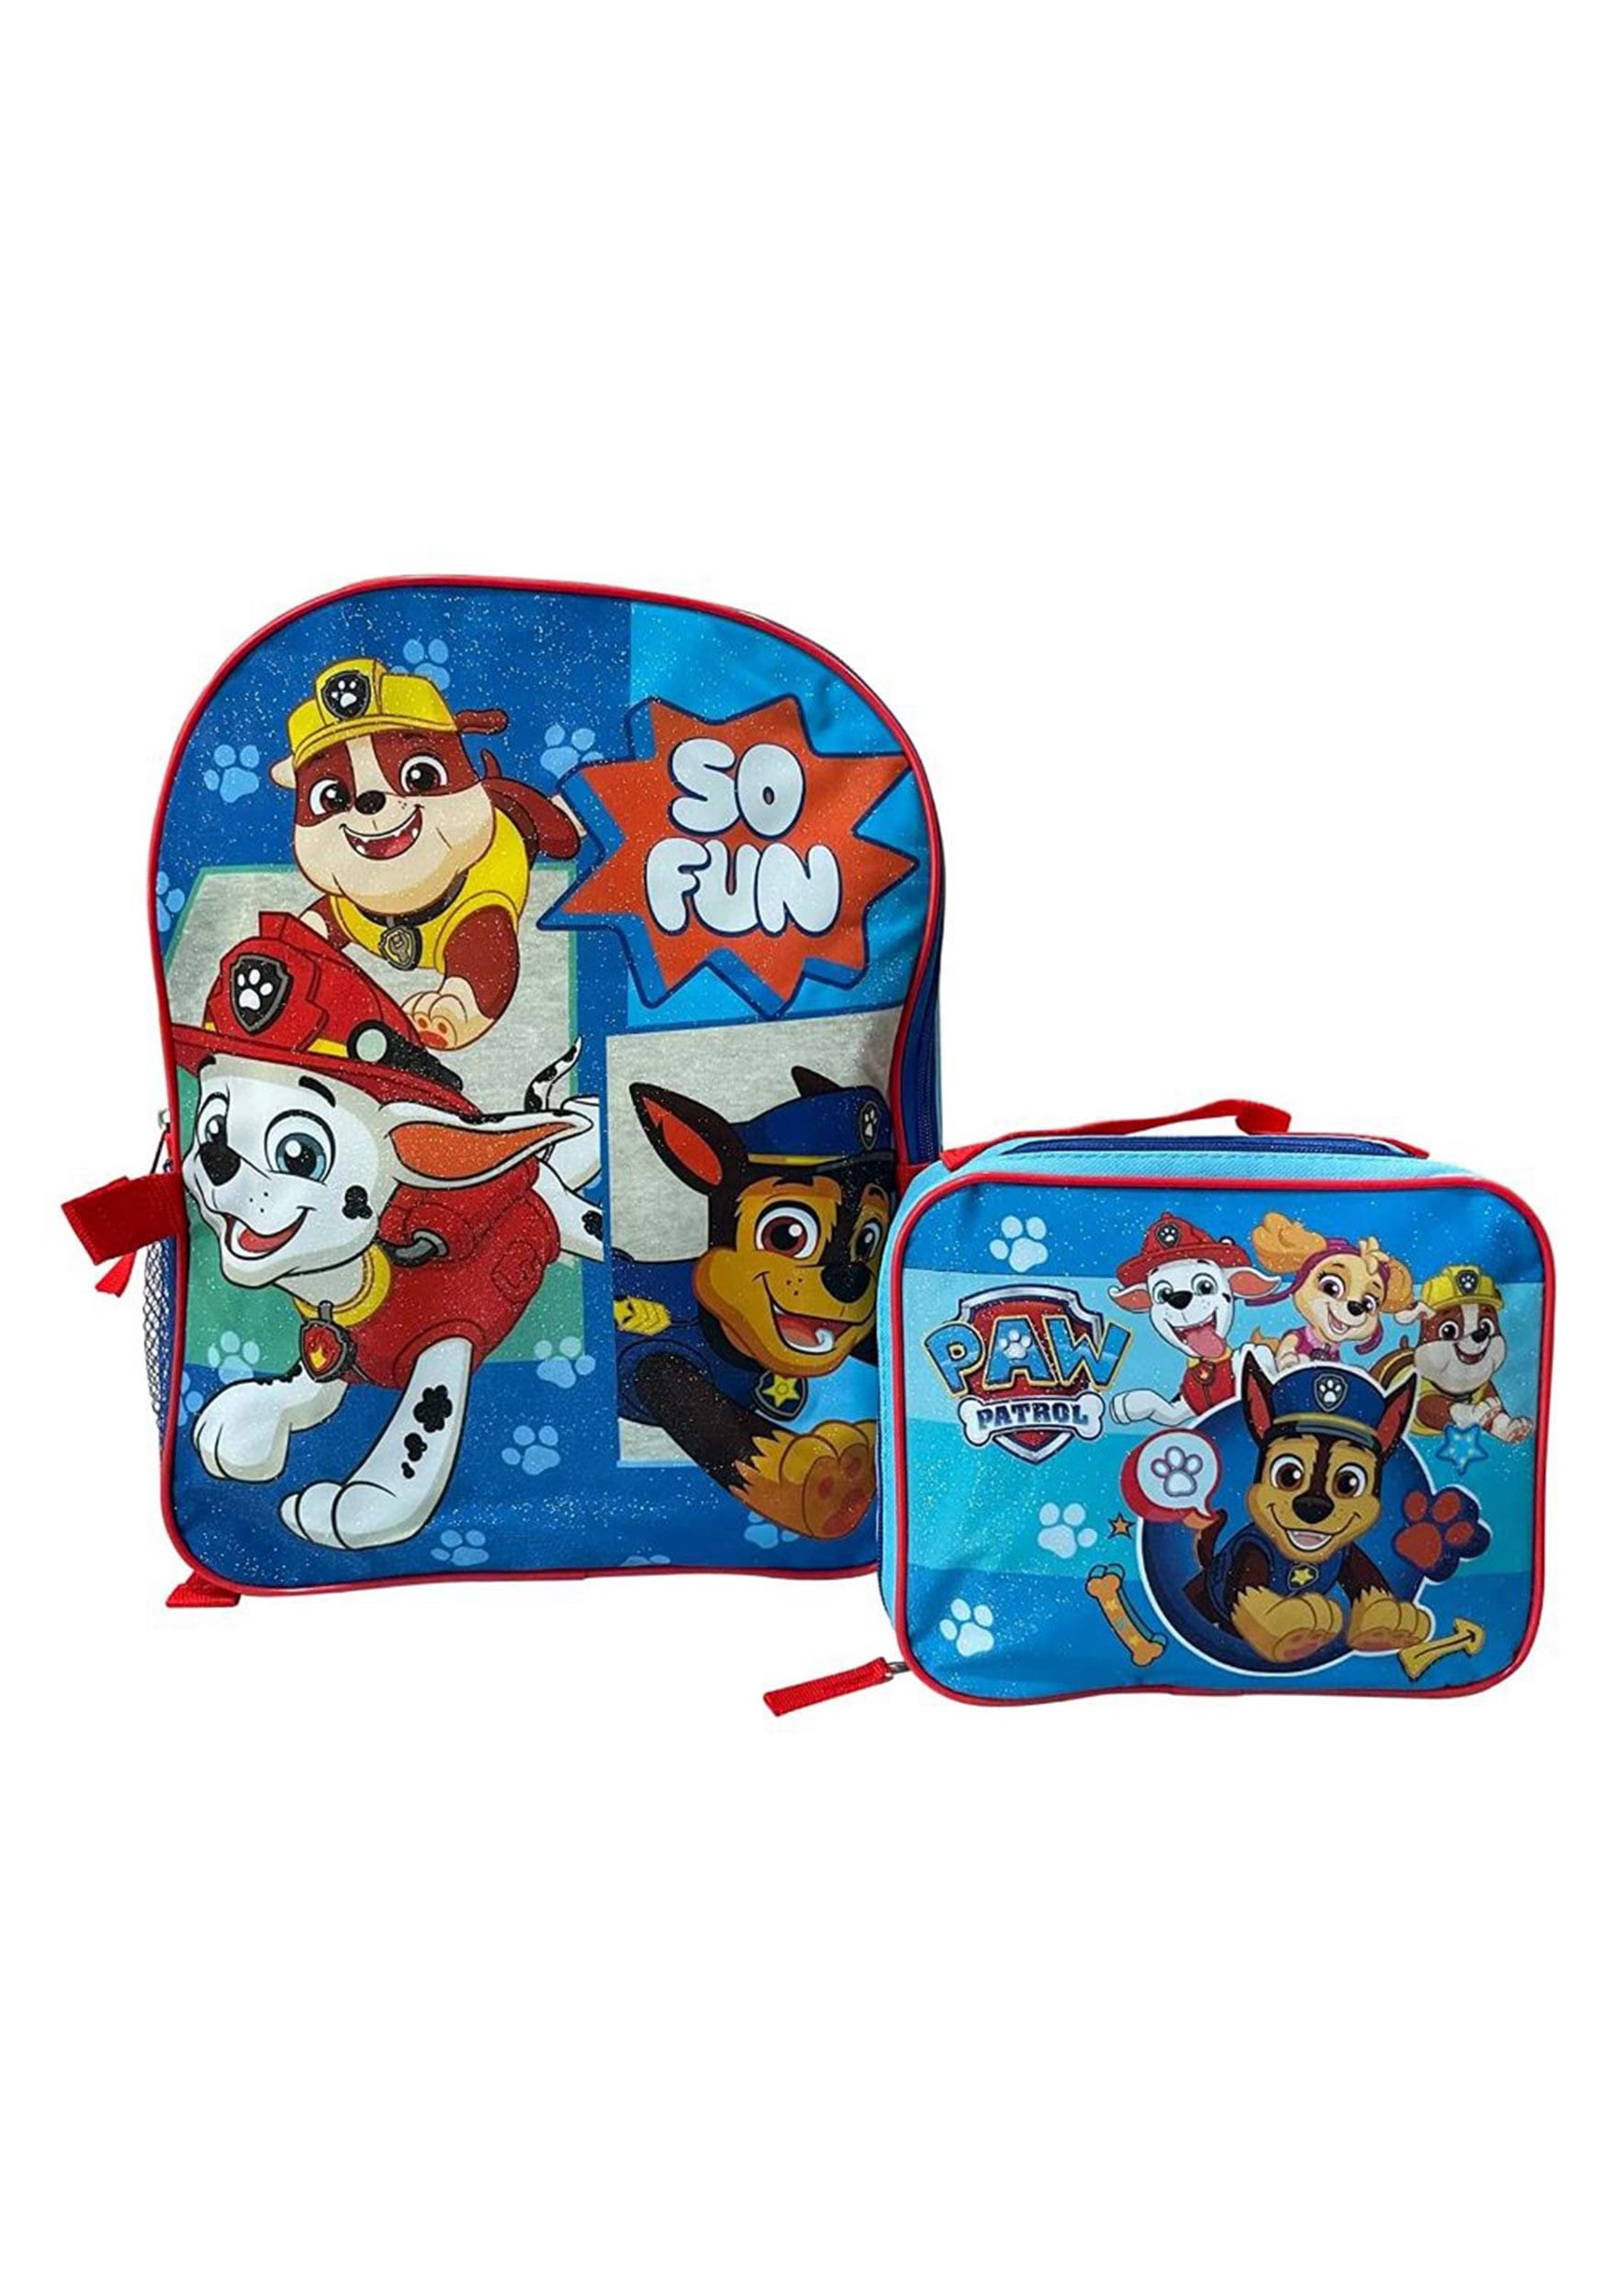 https://images.fun.com/products/89770/1-1/paw-patrol-large-backpack-with-lunch-bag.jpg